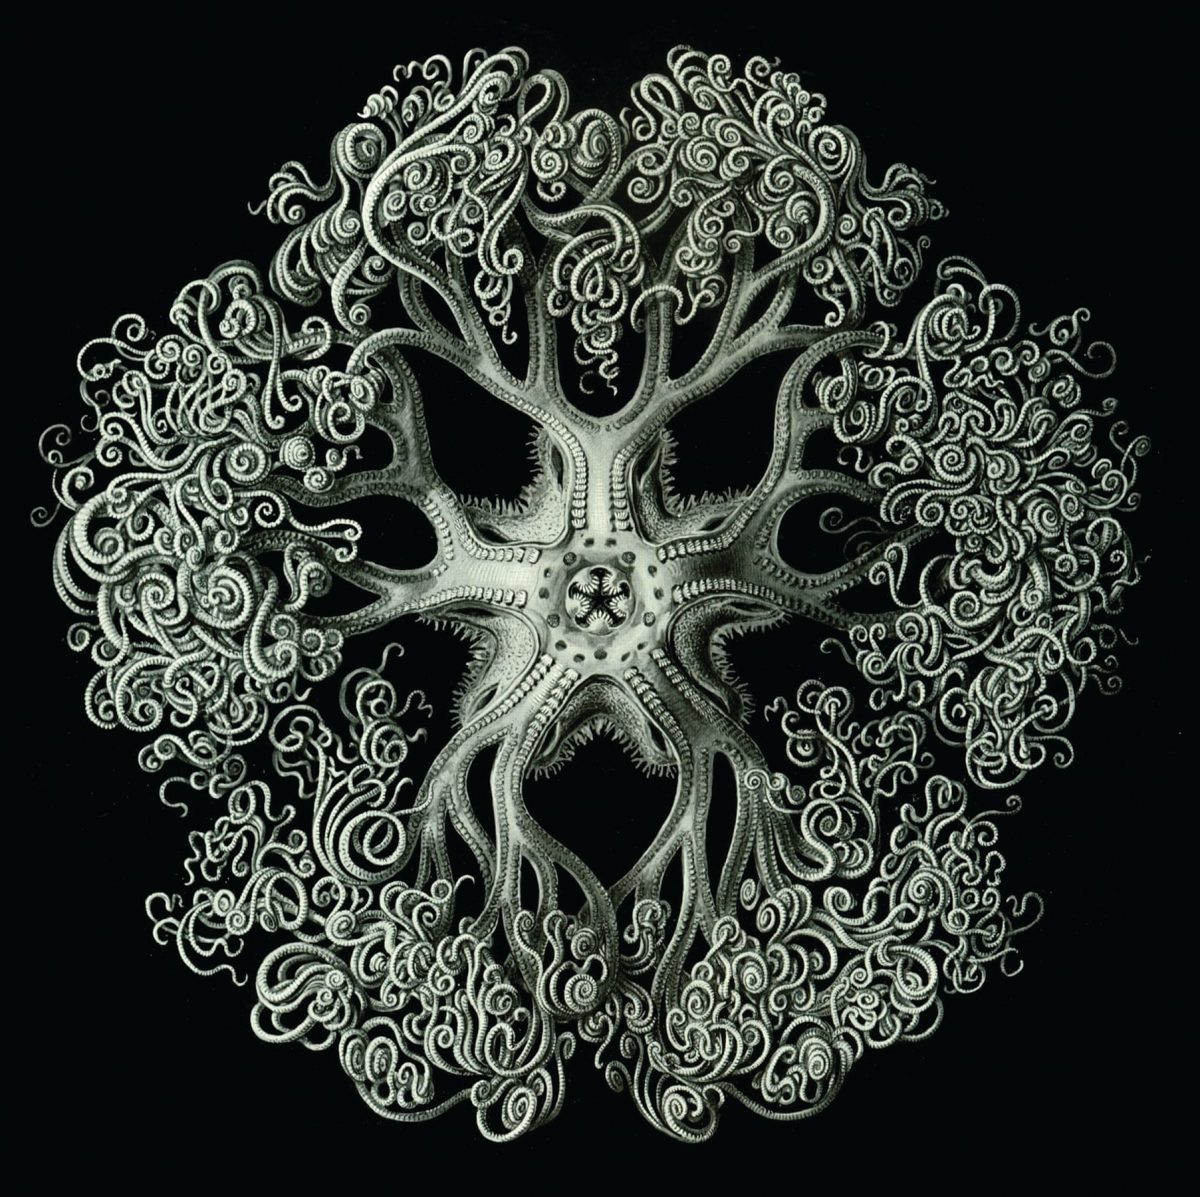 Ernst Haeckel, 1904. Lithograph of an ophidea, a type of echinoderm similar to a starfish